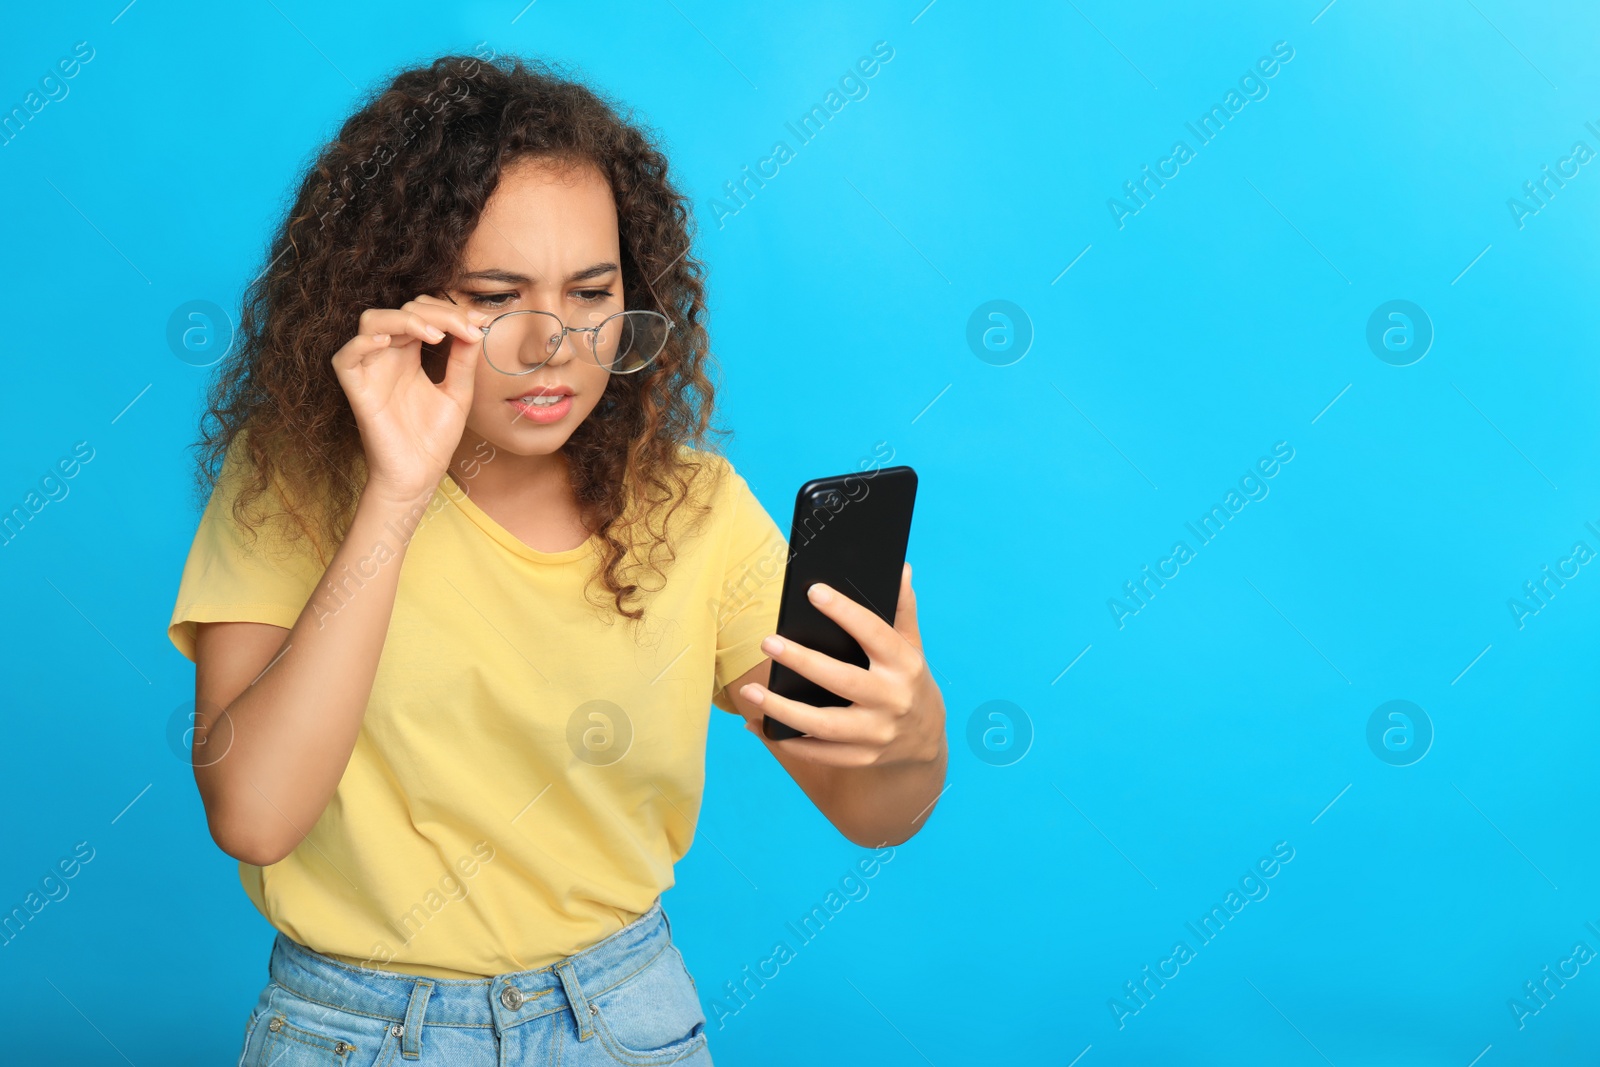 Photo of Young African-American woman with vision problems using smartphone on blue background